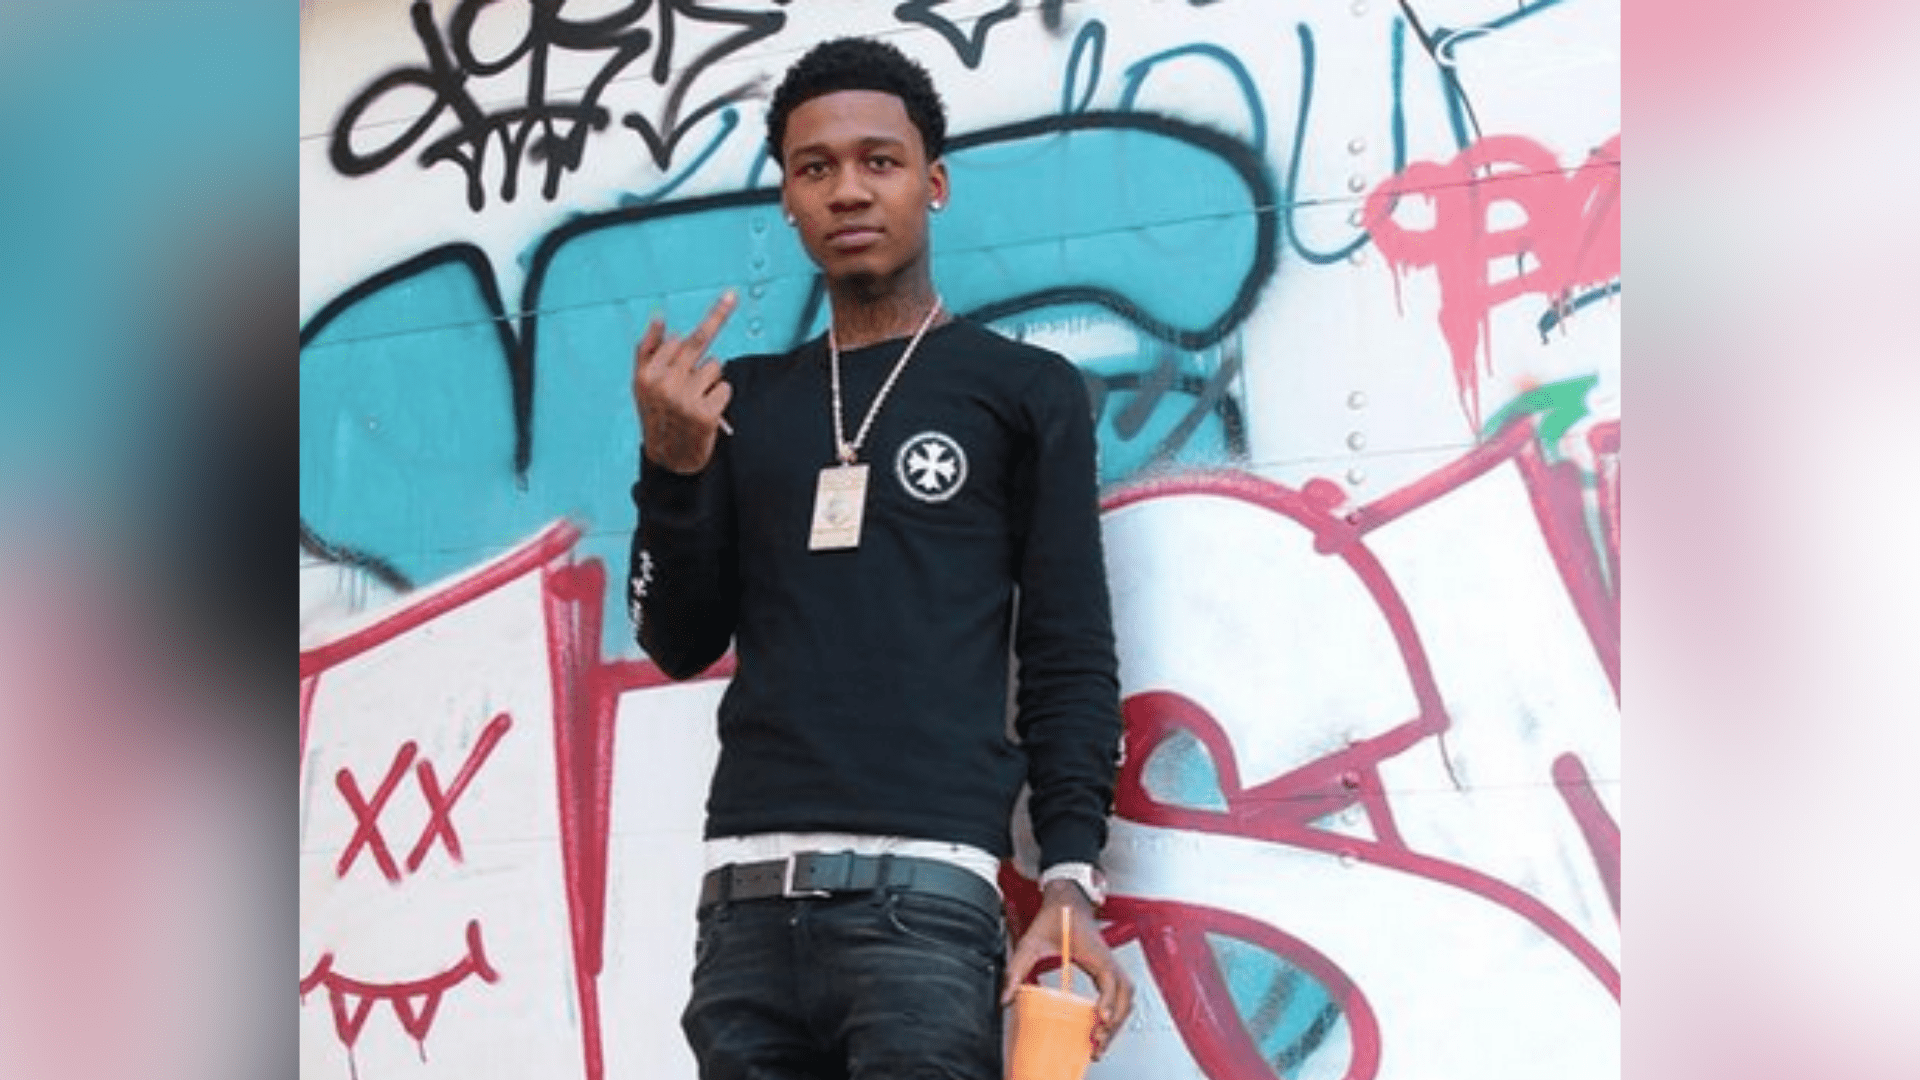 Brooklyn Drill Rapper Nas Blixky Shot And In Critical Condition